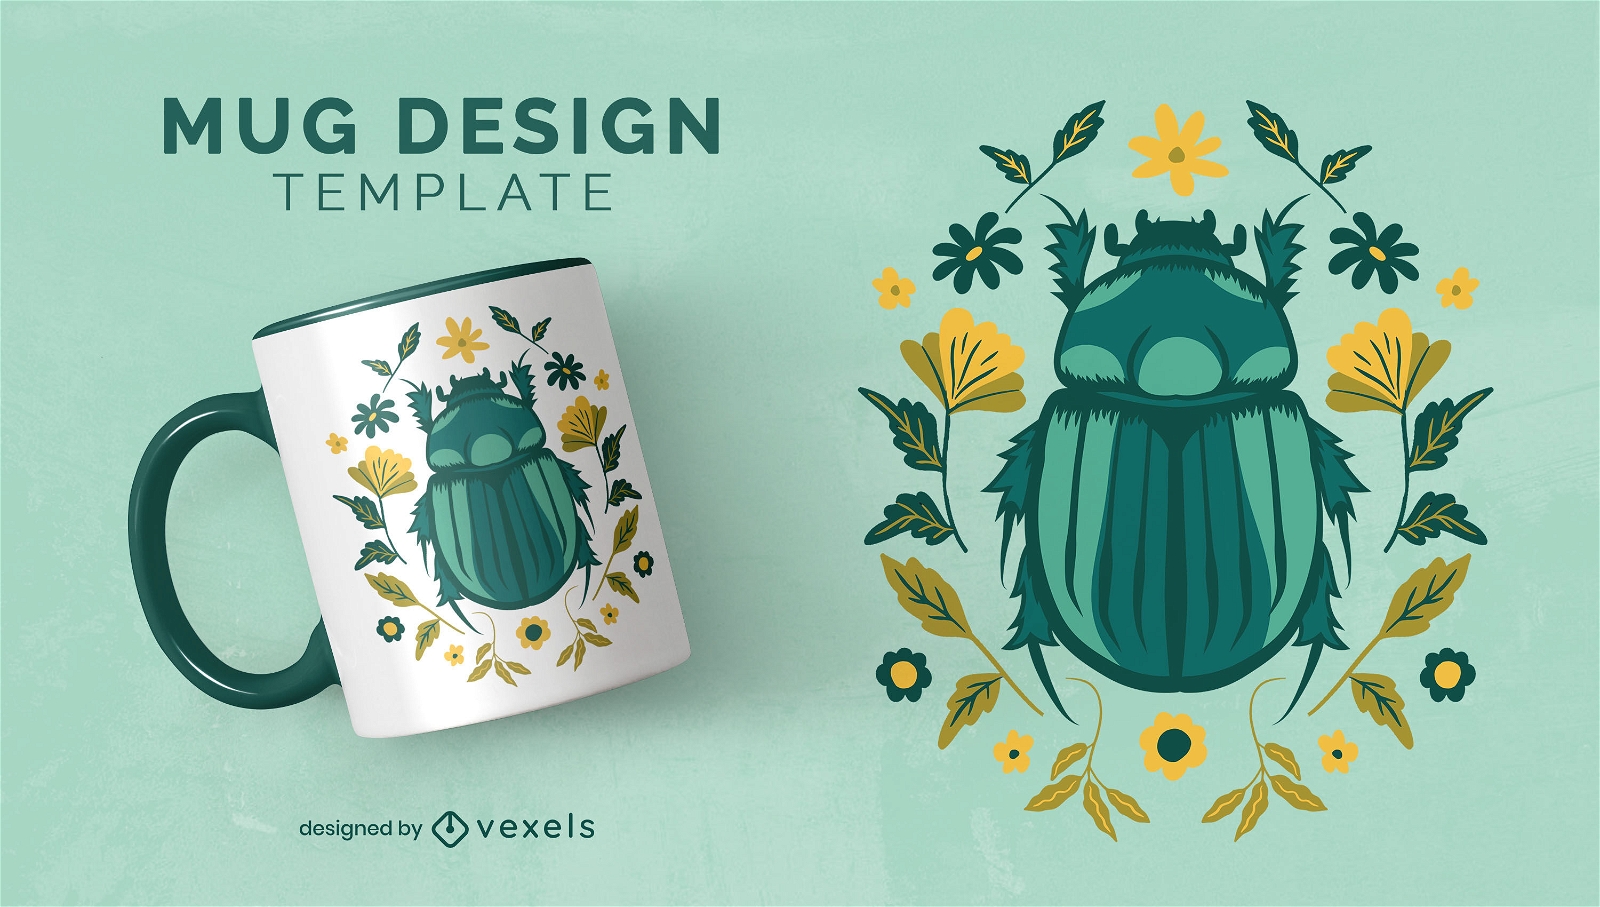 Beetle insect and flowers mug design